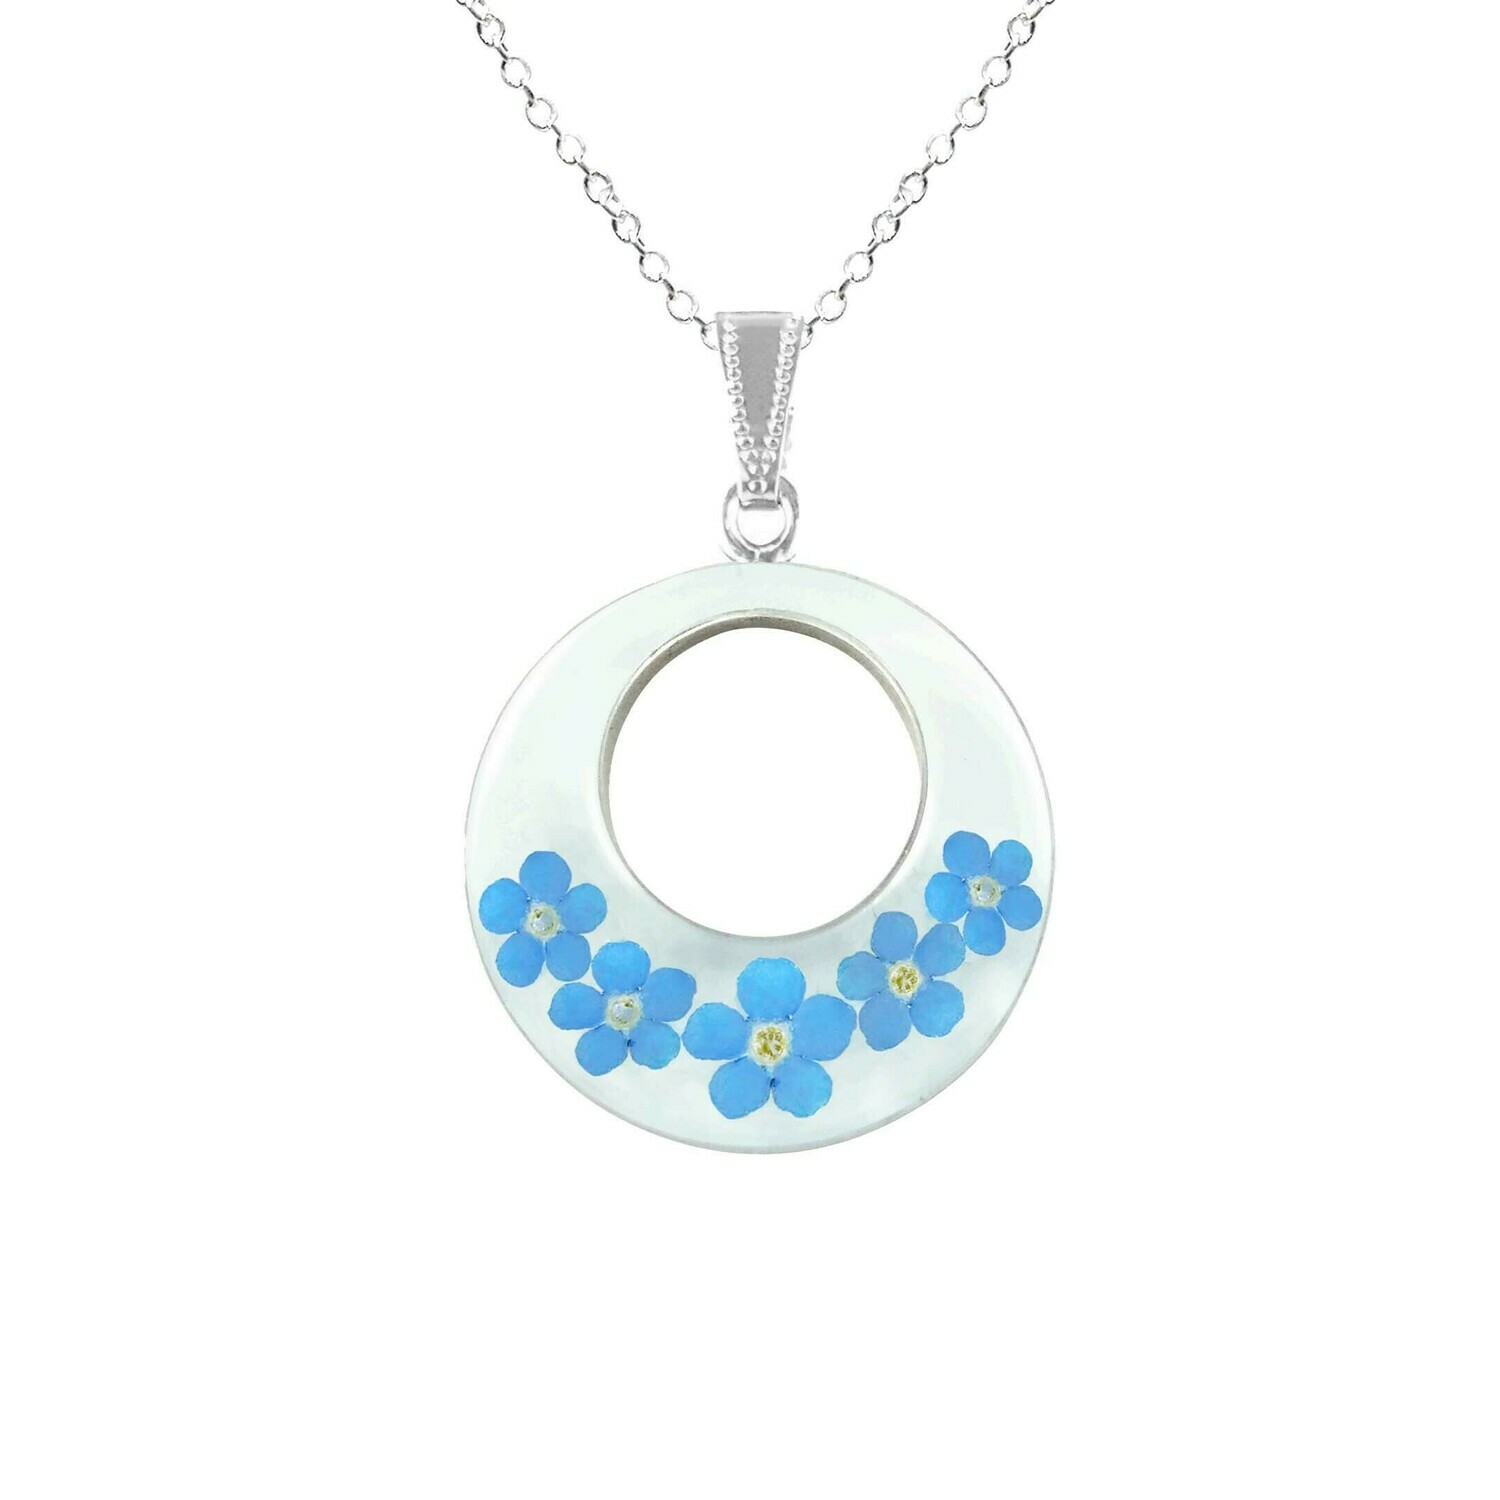 Forget-Me-Not Necklace, Full Moon Pendant, White Background